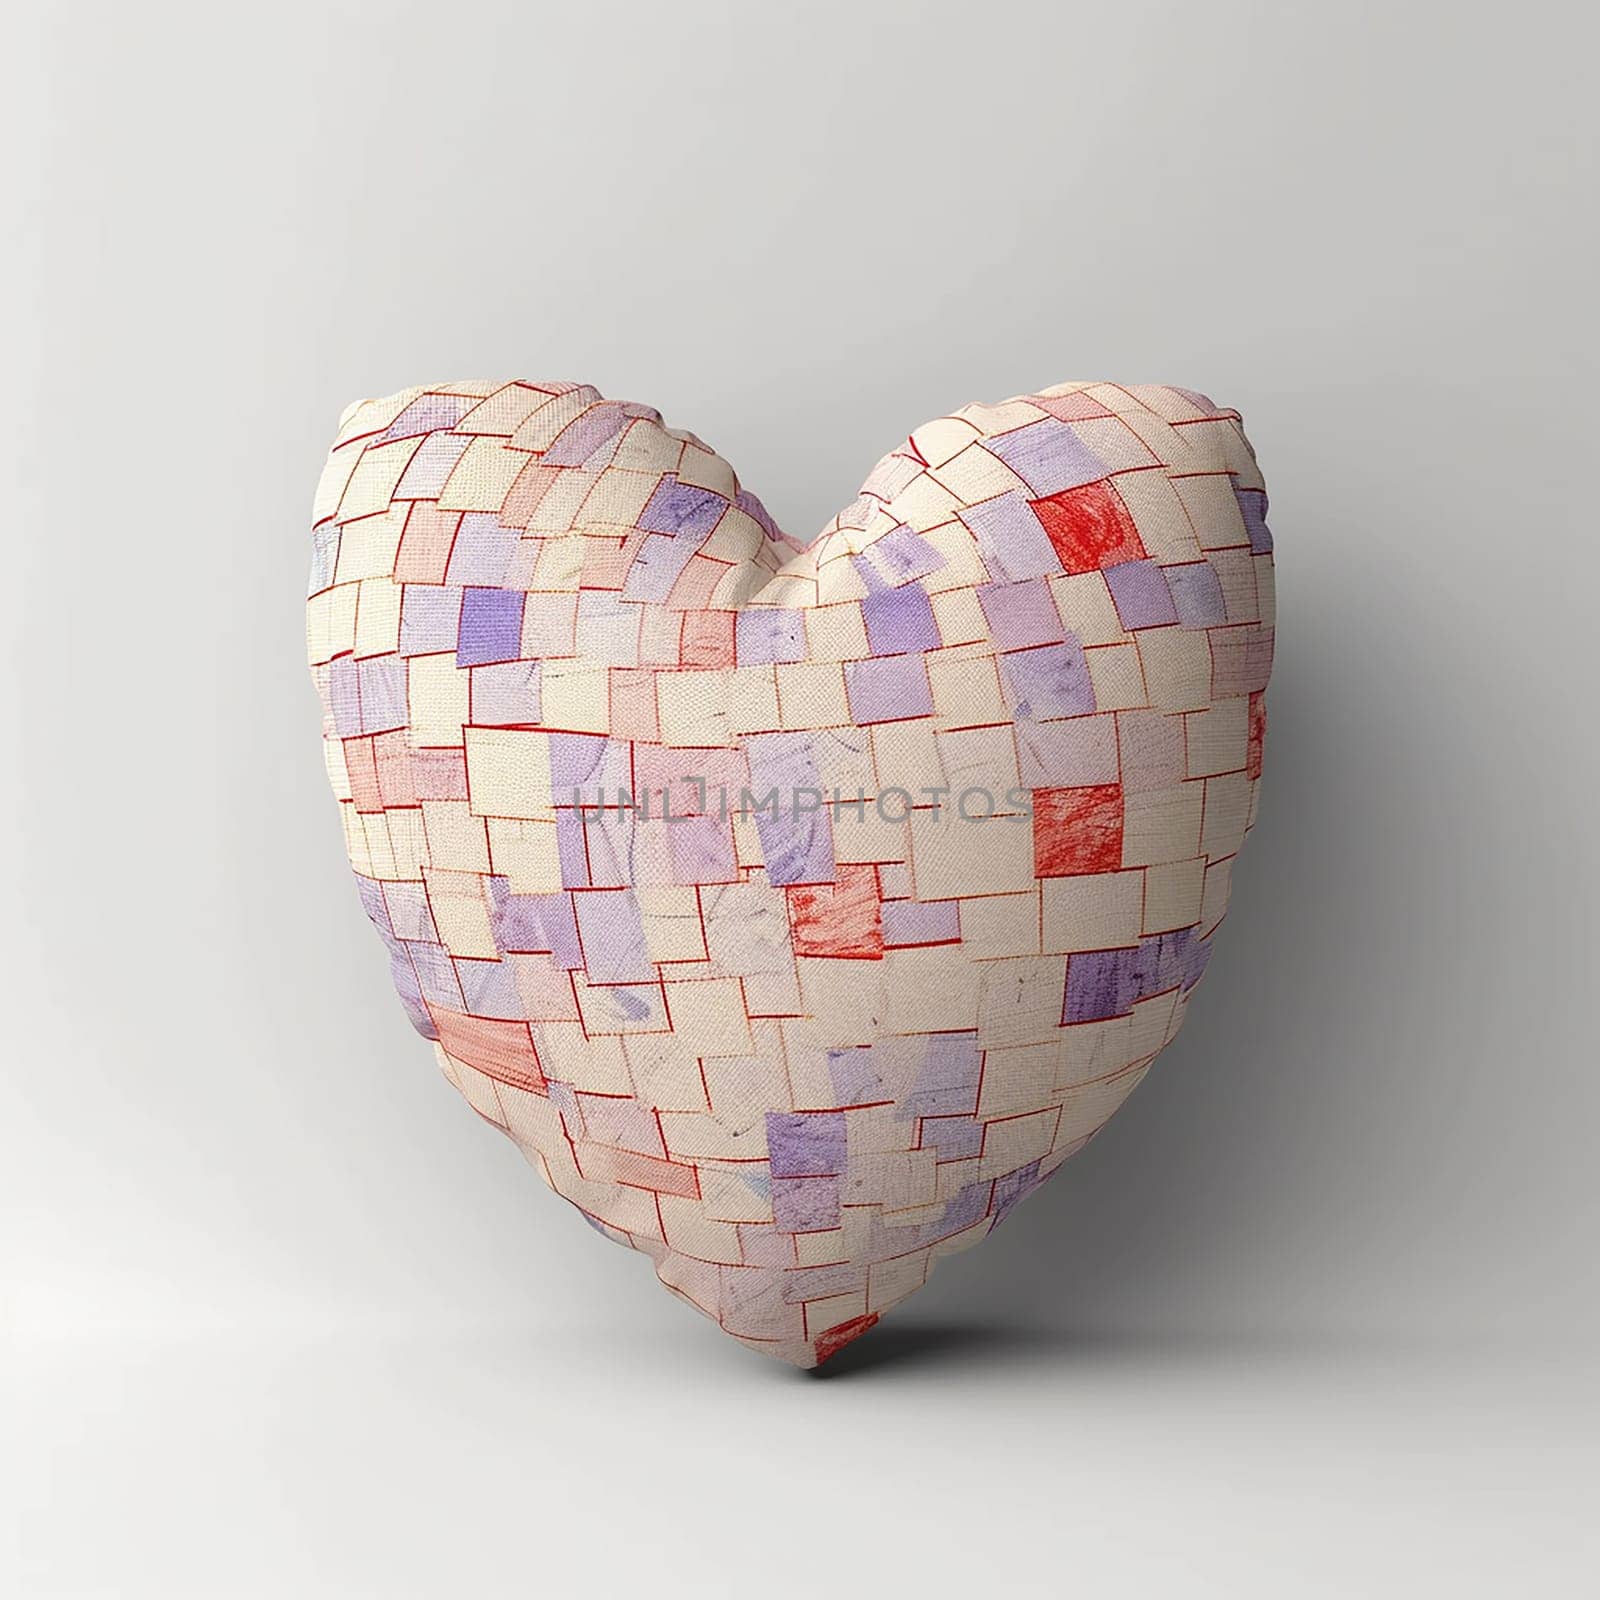 A mosaic heart sculpture with a pattern of pink and purple tiles.